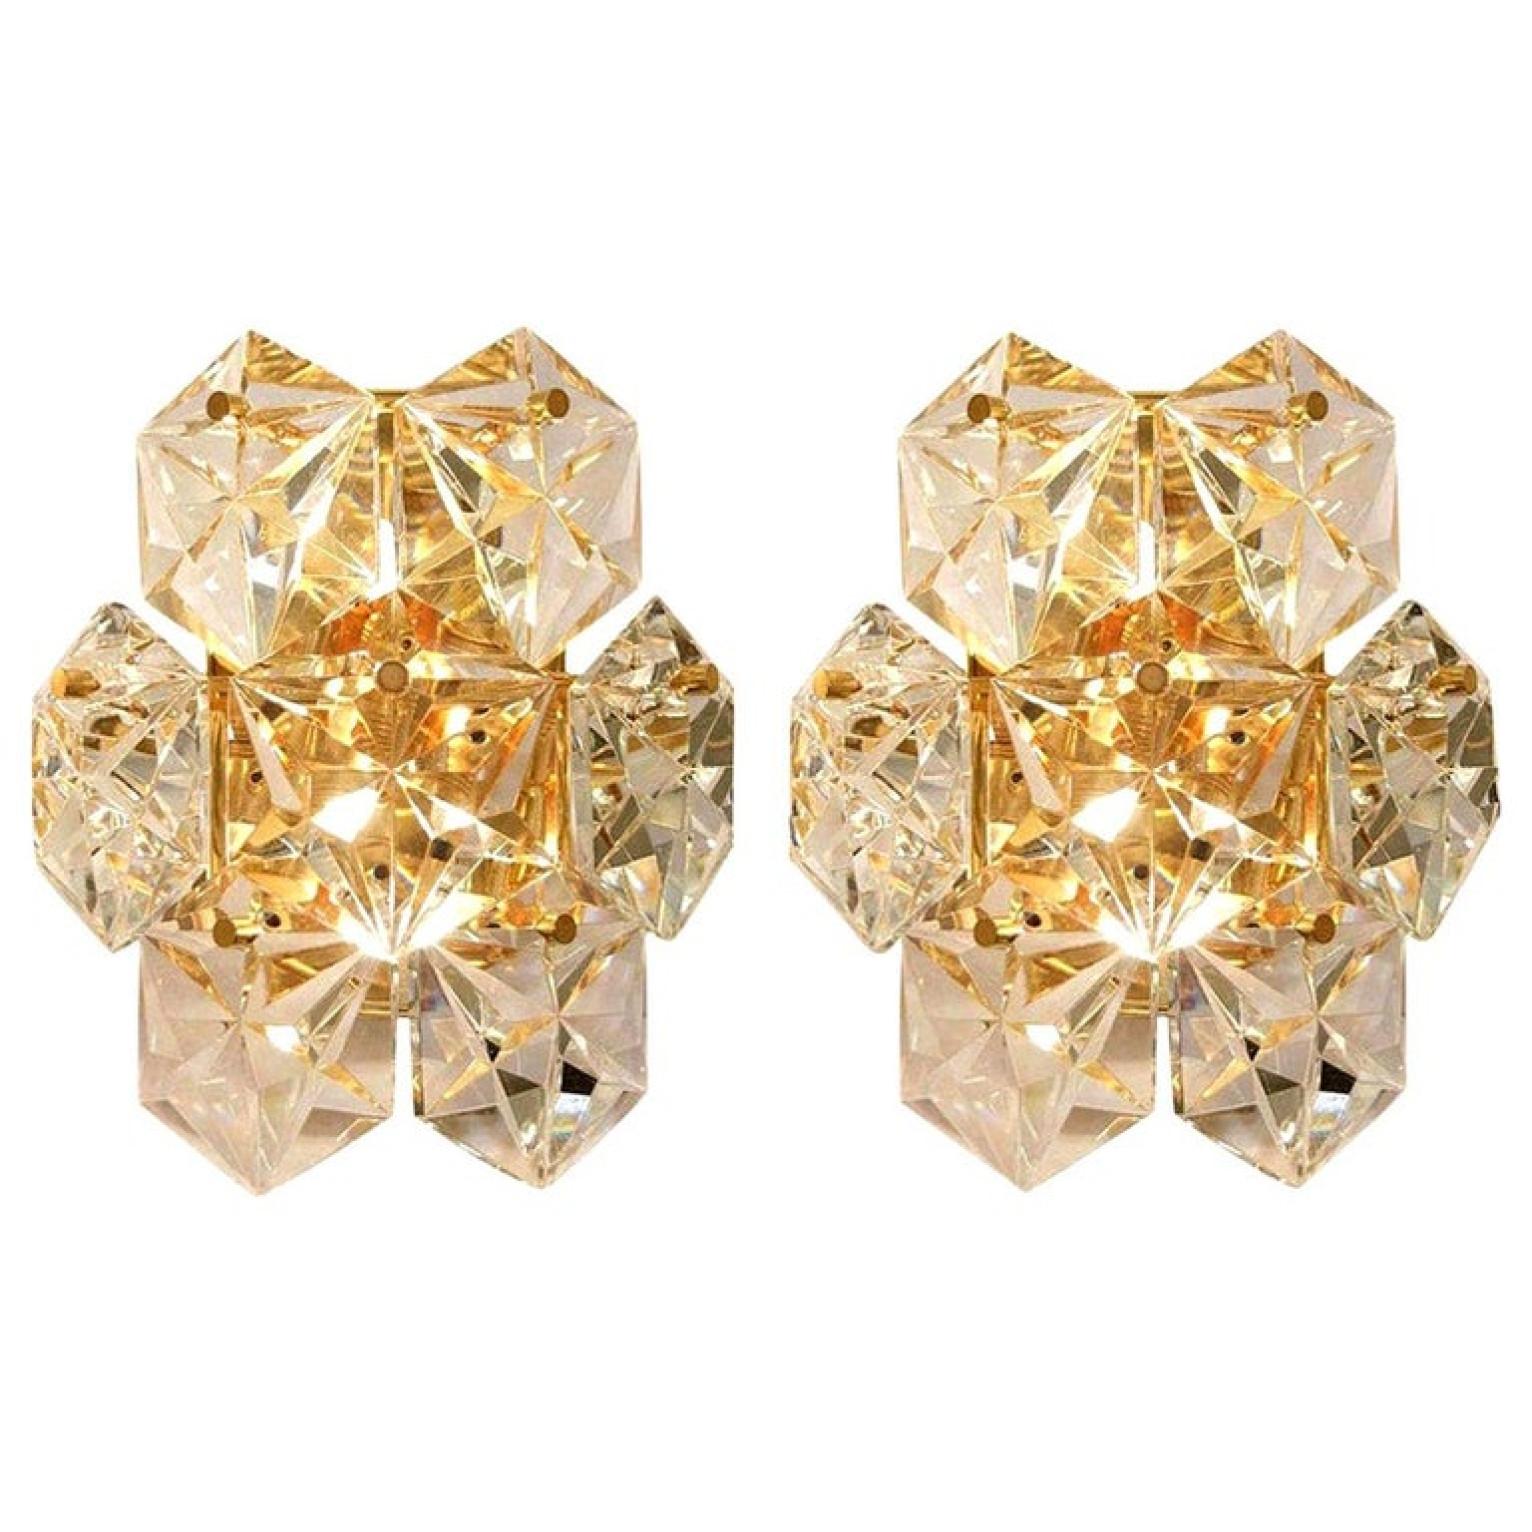 One of the three pairs luxurious gold-plated frames and thick diamond crystal sconces by the famed maker, Kinkeldey. Two-light sources. Very elegant light fixtures, comfortable with all decor periods. The crystals are meticulously cut in such a way